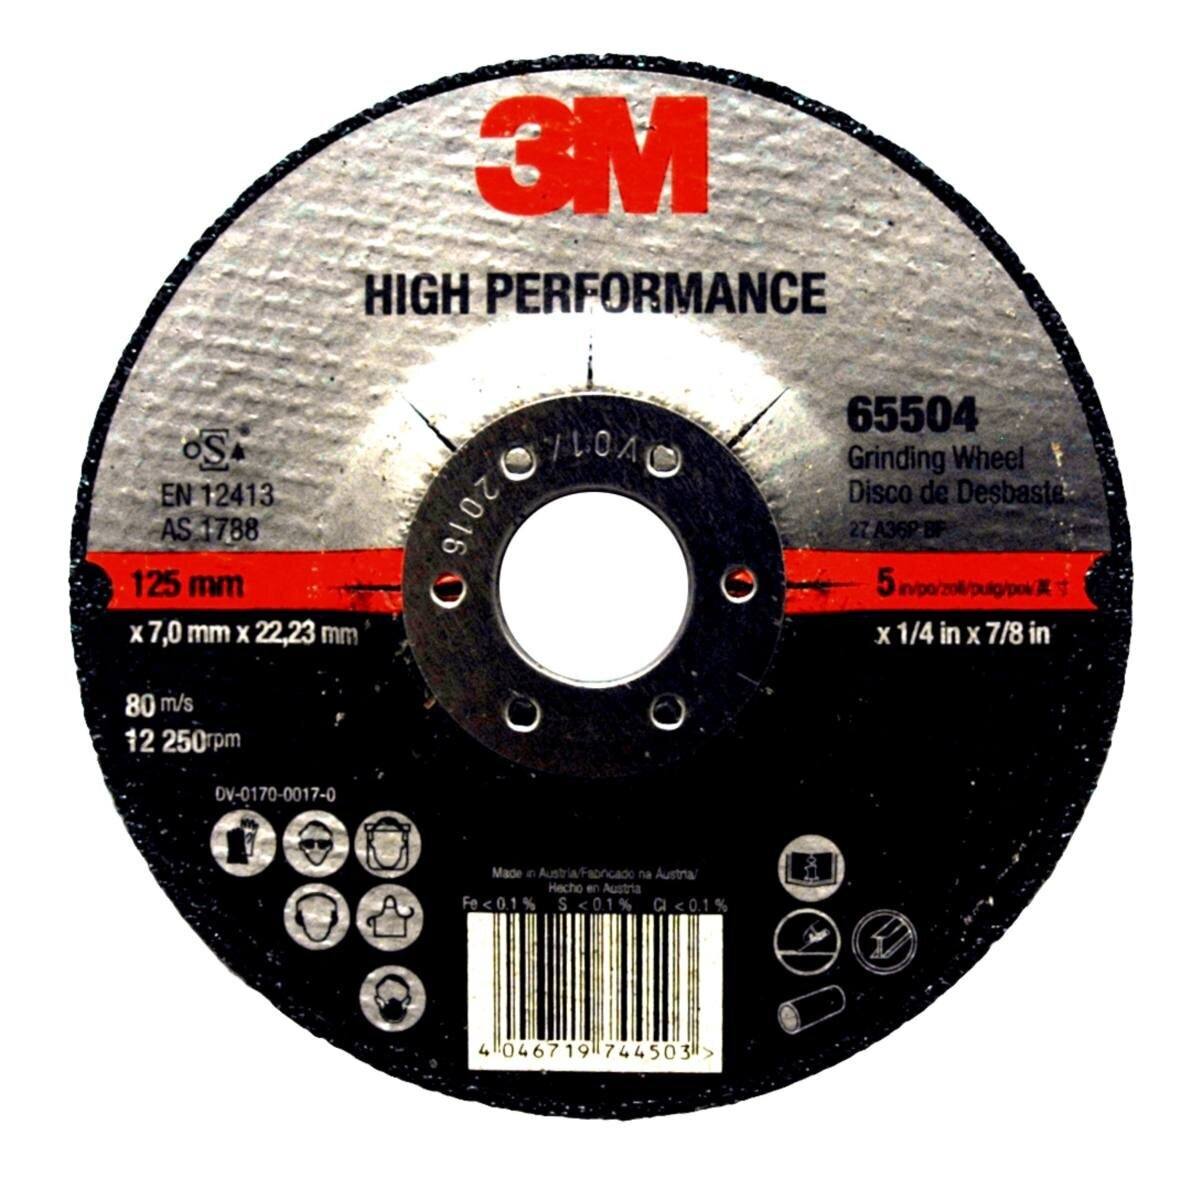 3M High Performance grinding disc, 230 mm, 7.0 mm, 22.23 mm, type 27 #65497